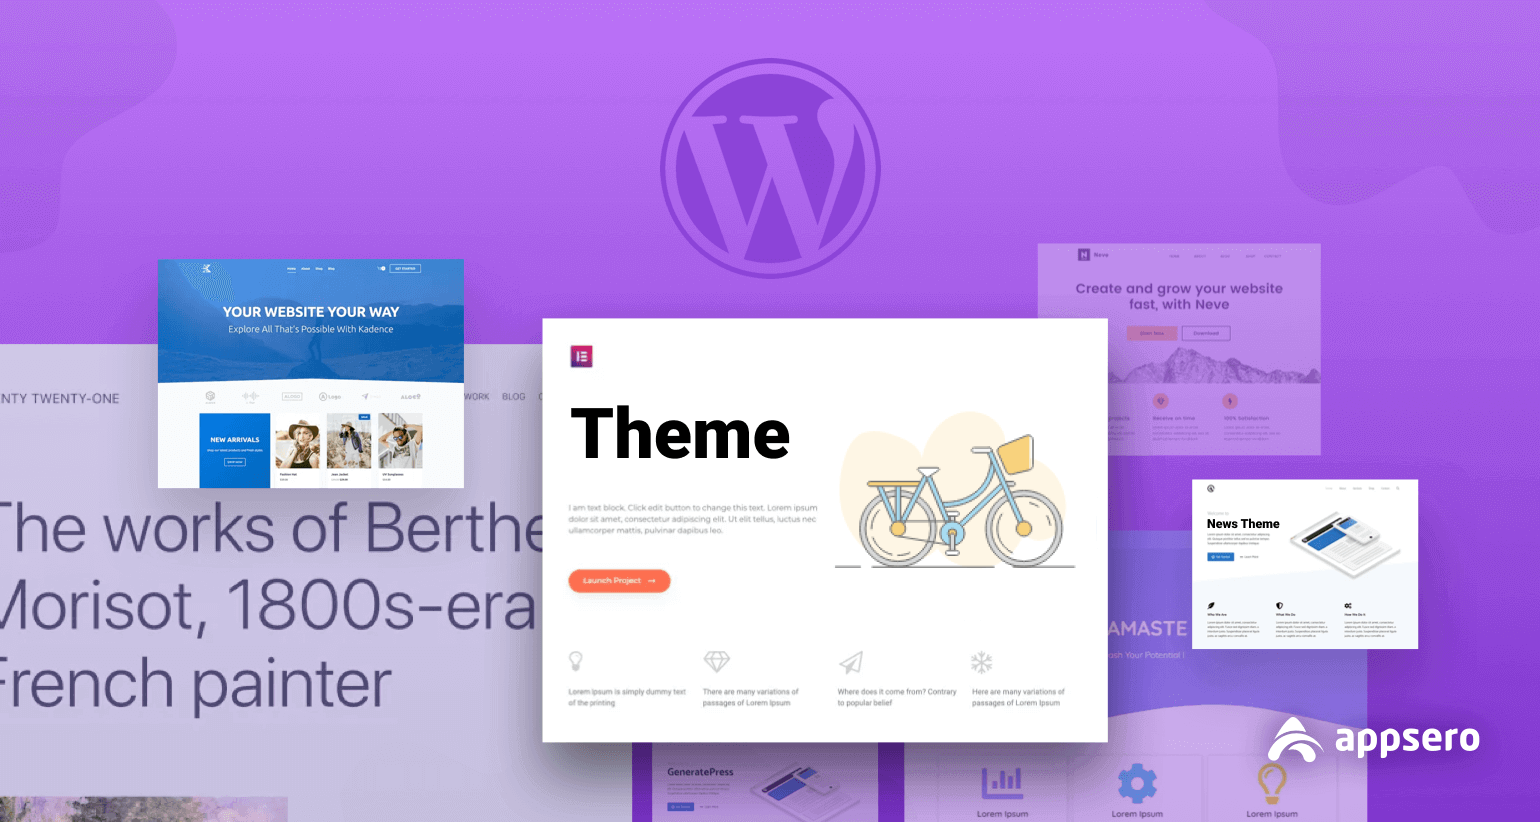 How to Sell WordPress Themes: A Comprehensive Guide for WordPress Theme Developers